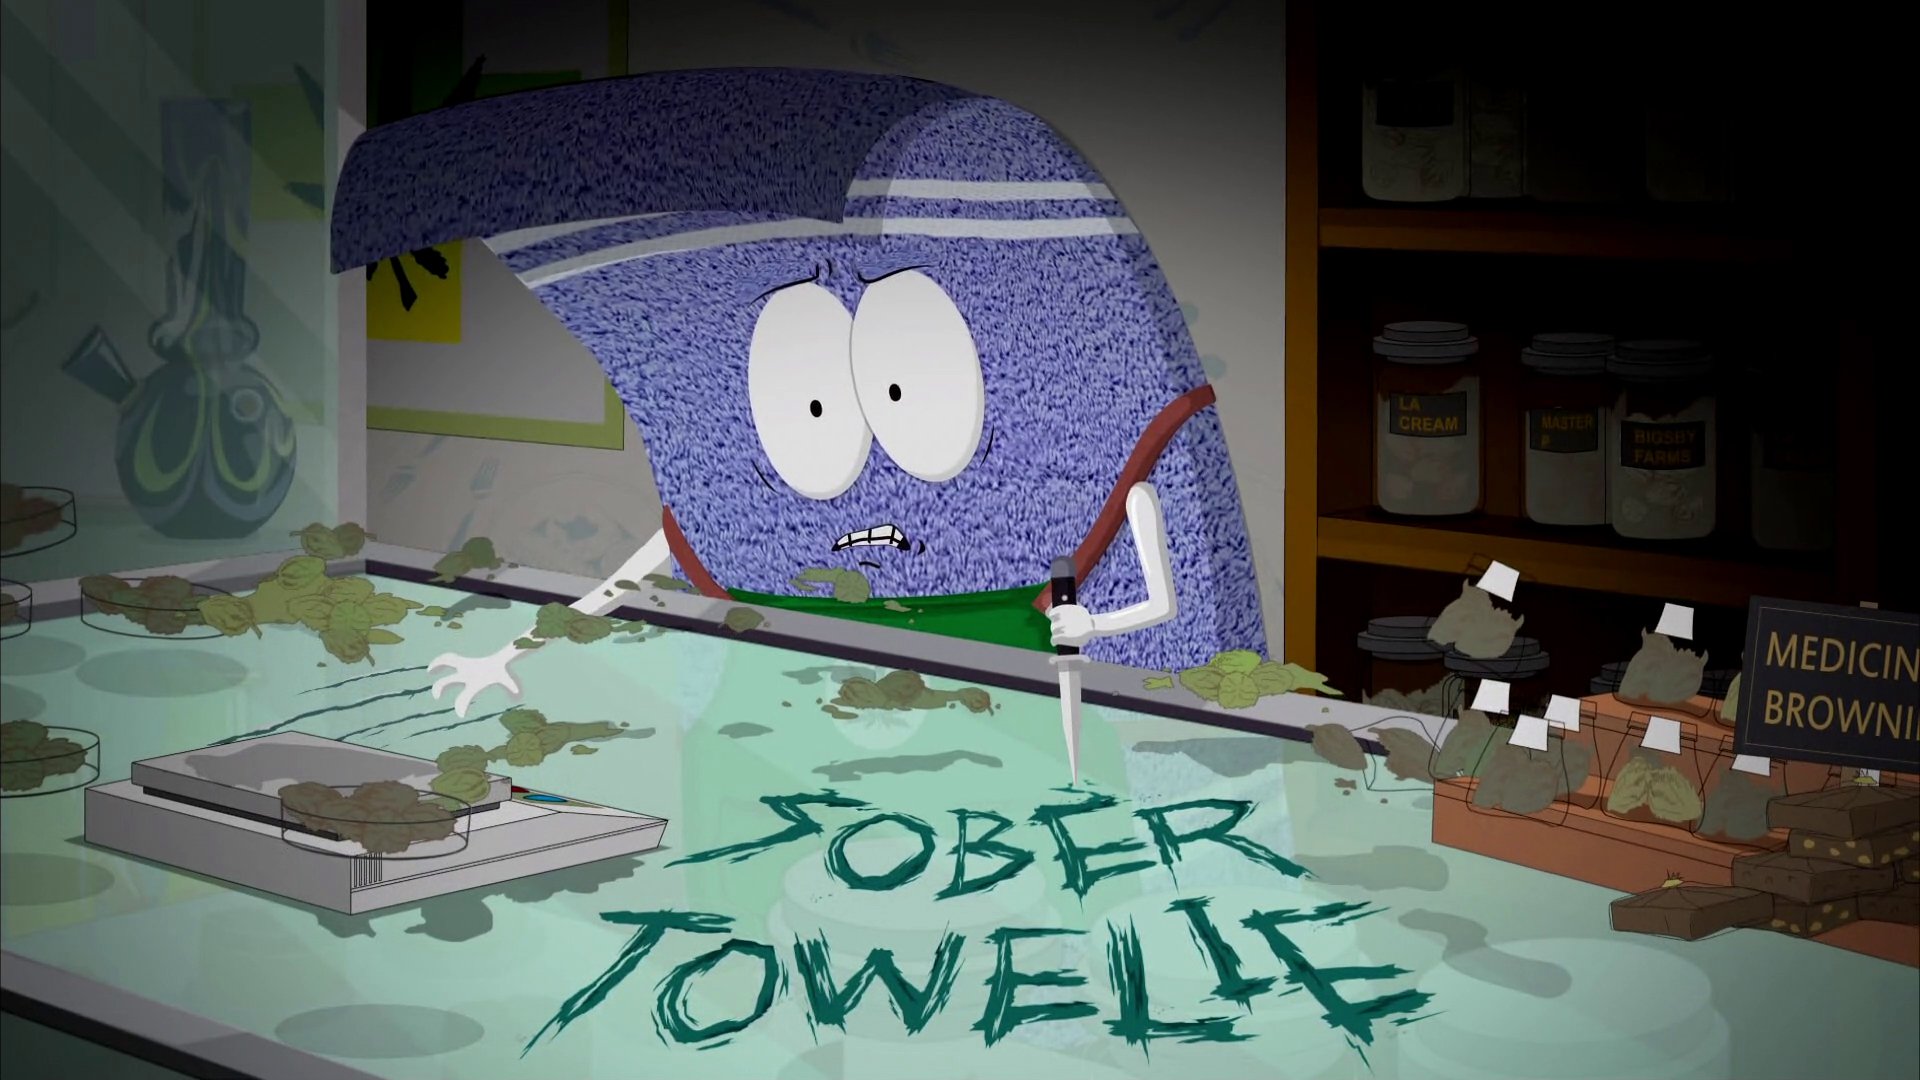 South Park: The Fractured But Whole Towelie